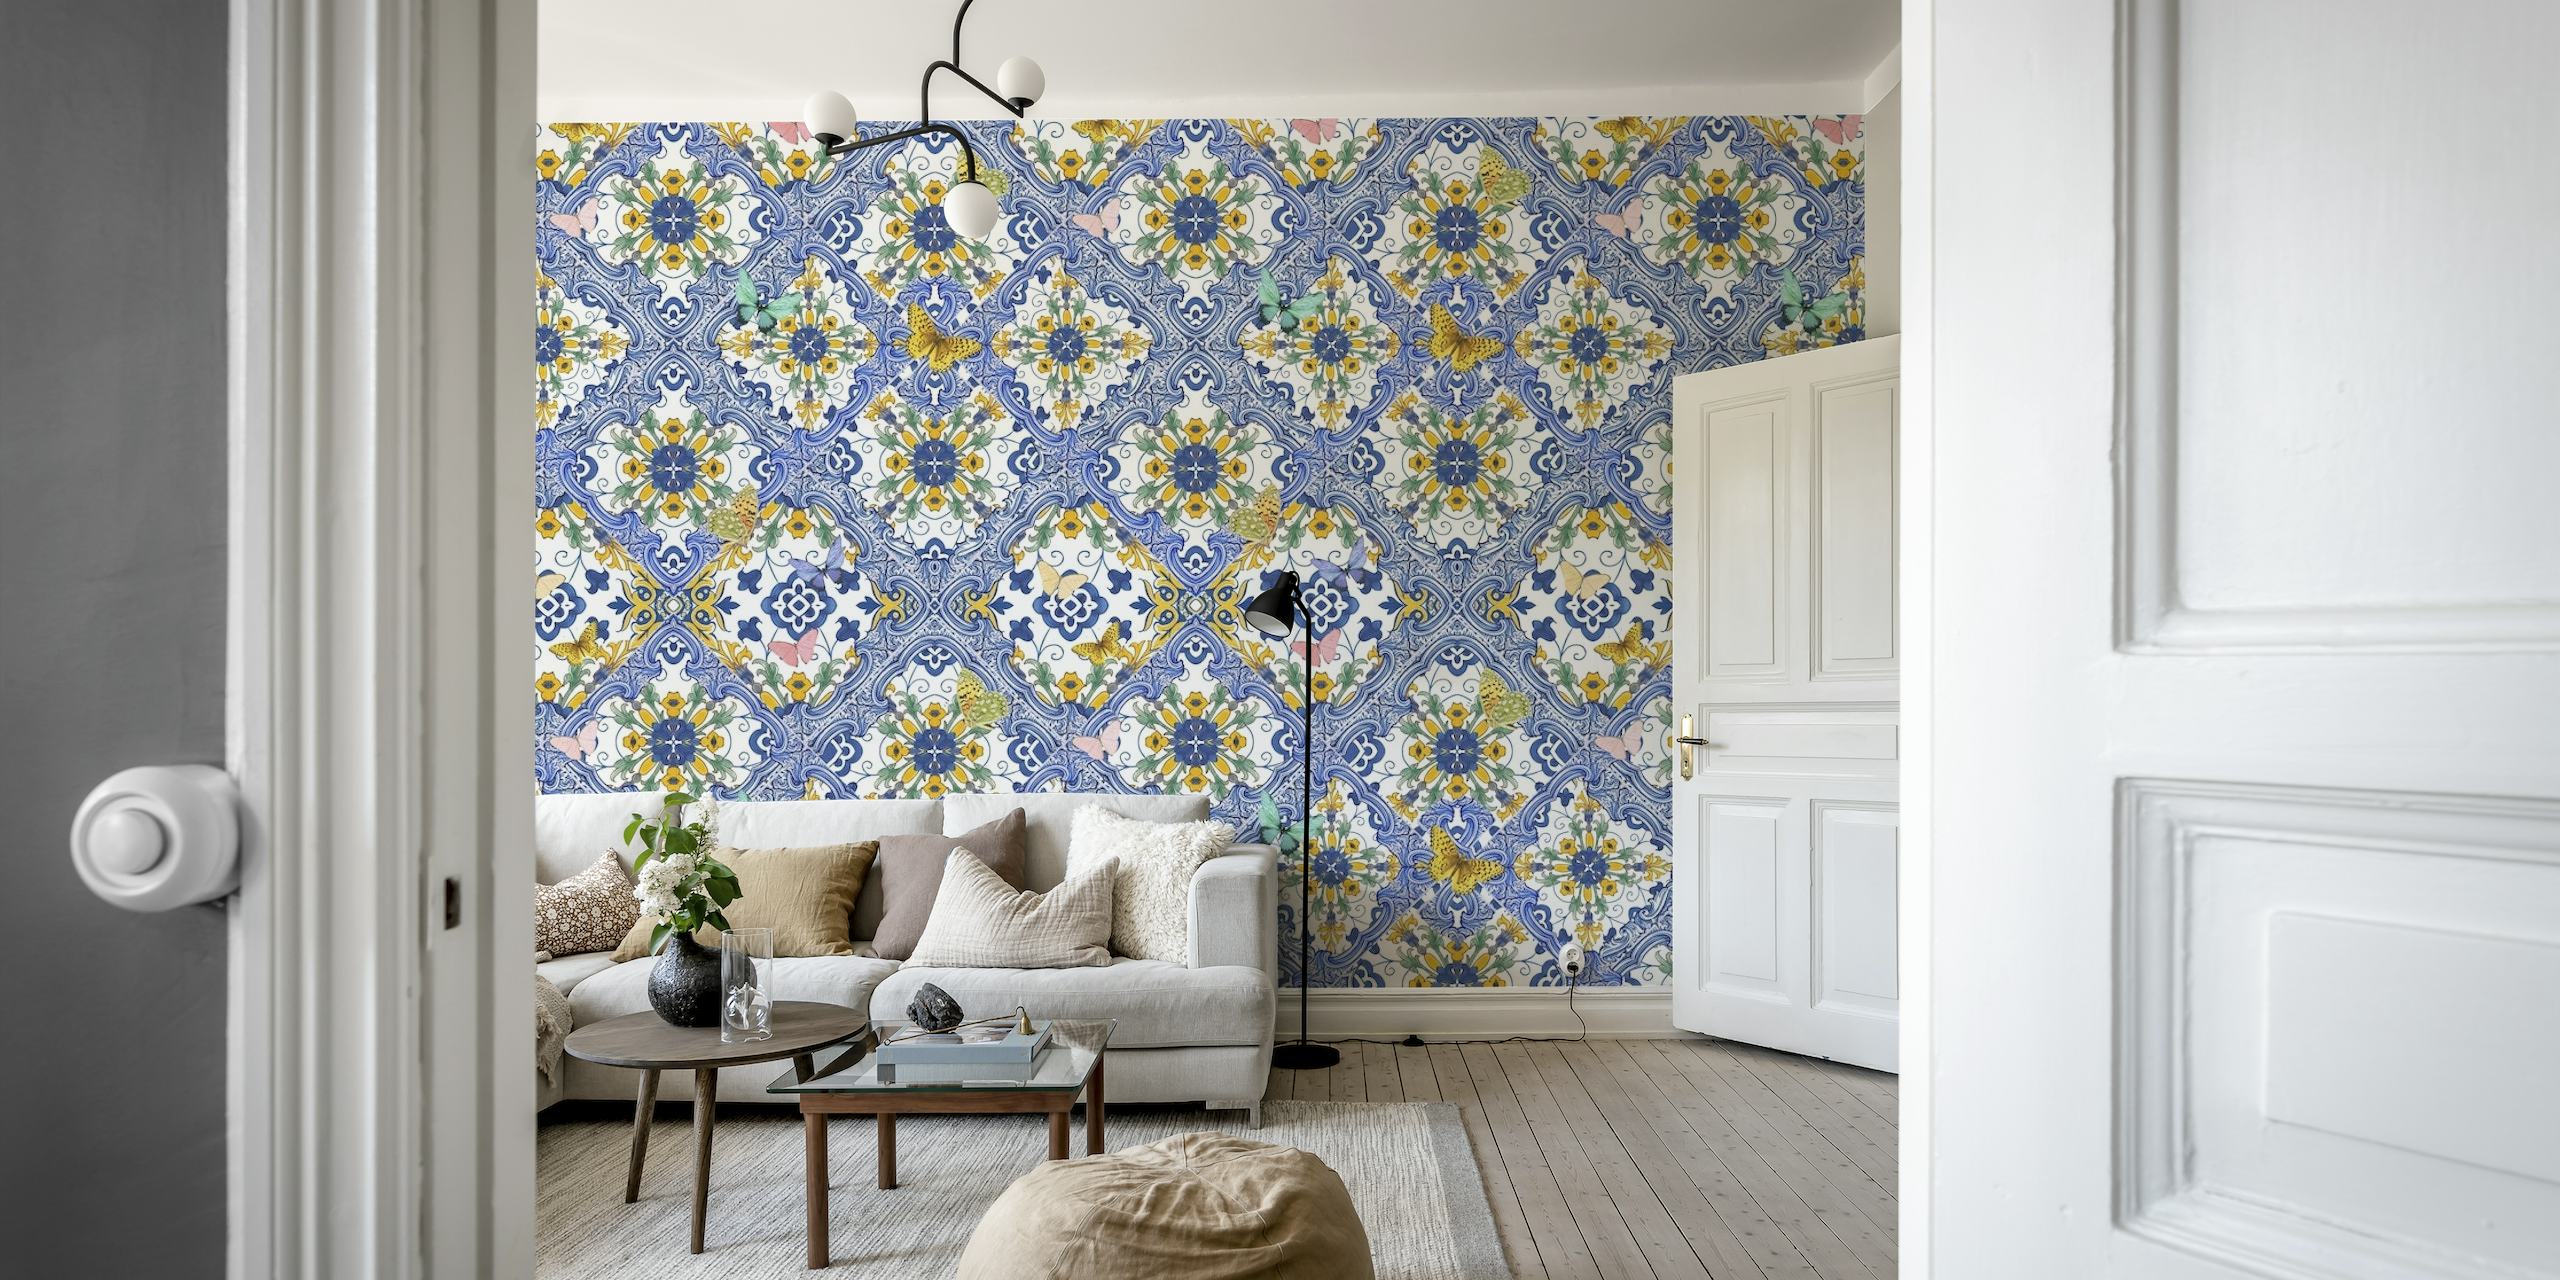 Blue tiles, yellow flowers and butterflies ταπετσαρία